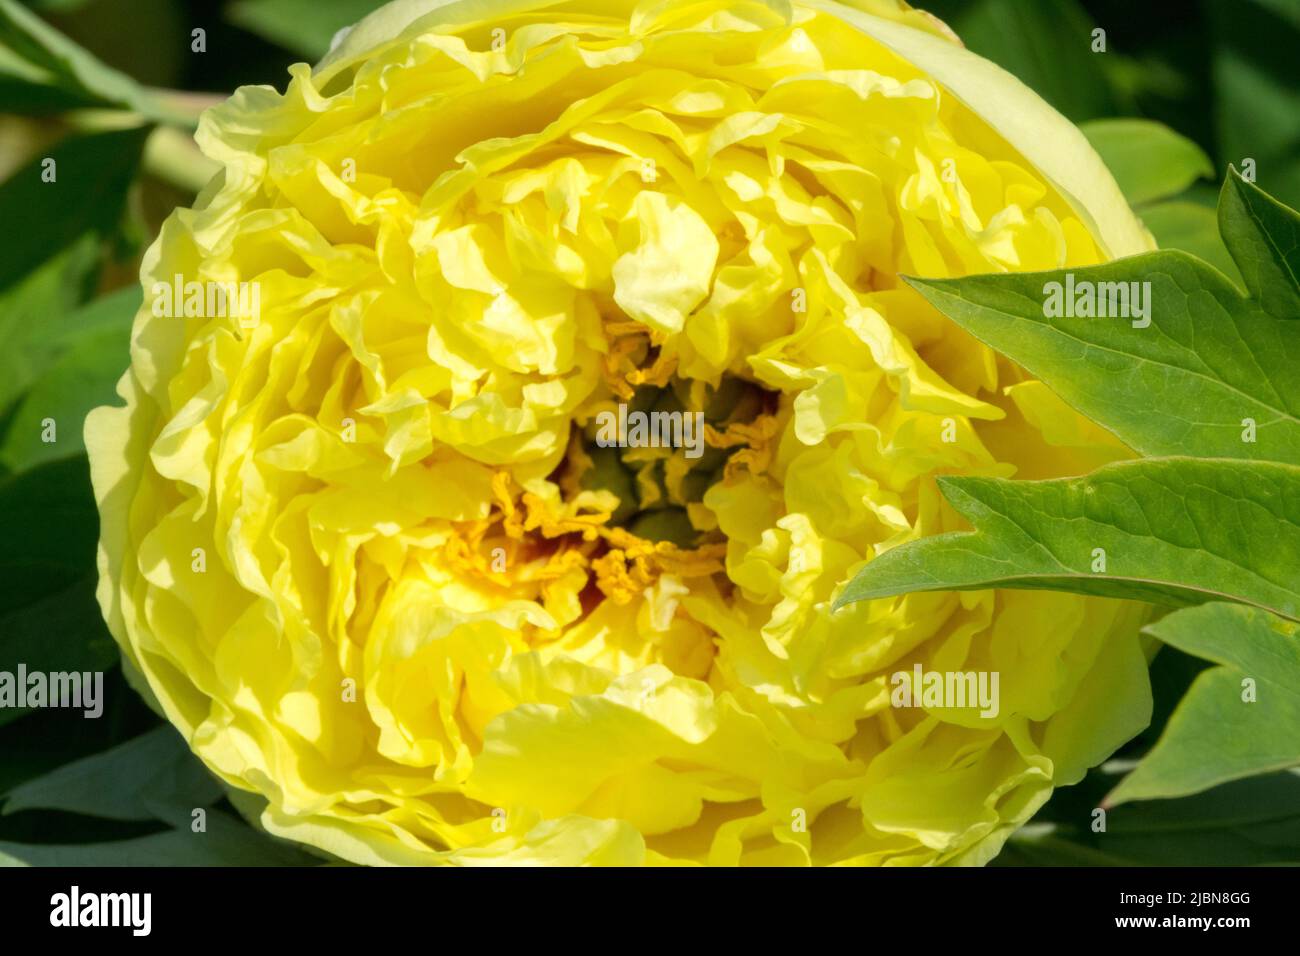 Single Flower Itoh Peony Intersectional Hybrid Paeonia 'Yellow Crown' Large Flower Head Bloom Peony Yellow Crown Flowering Peonies Blooms Attractive Stock Photo